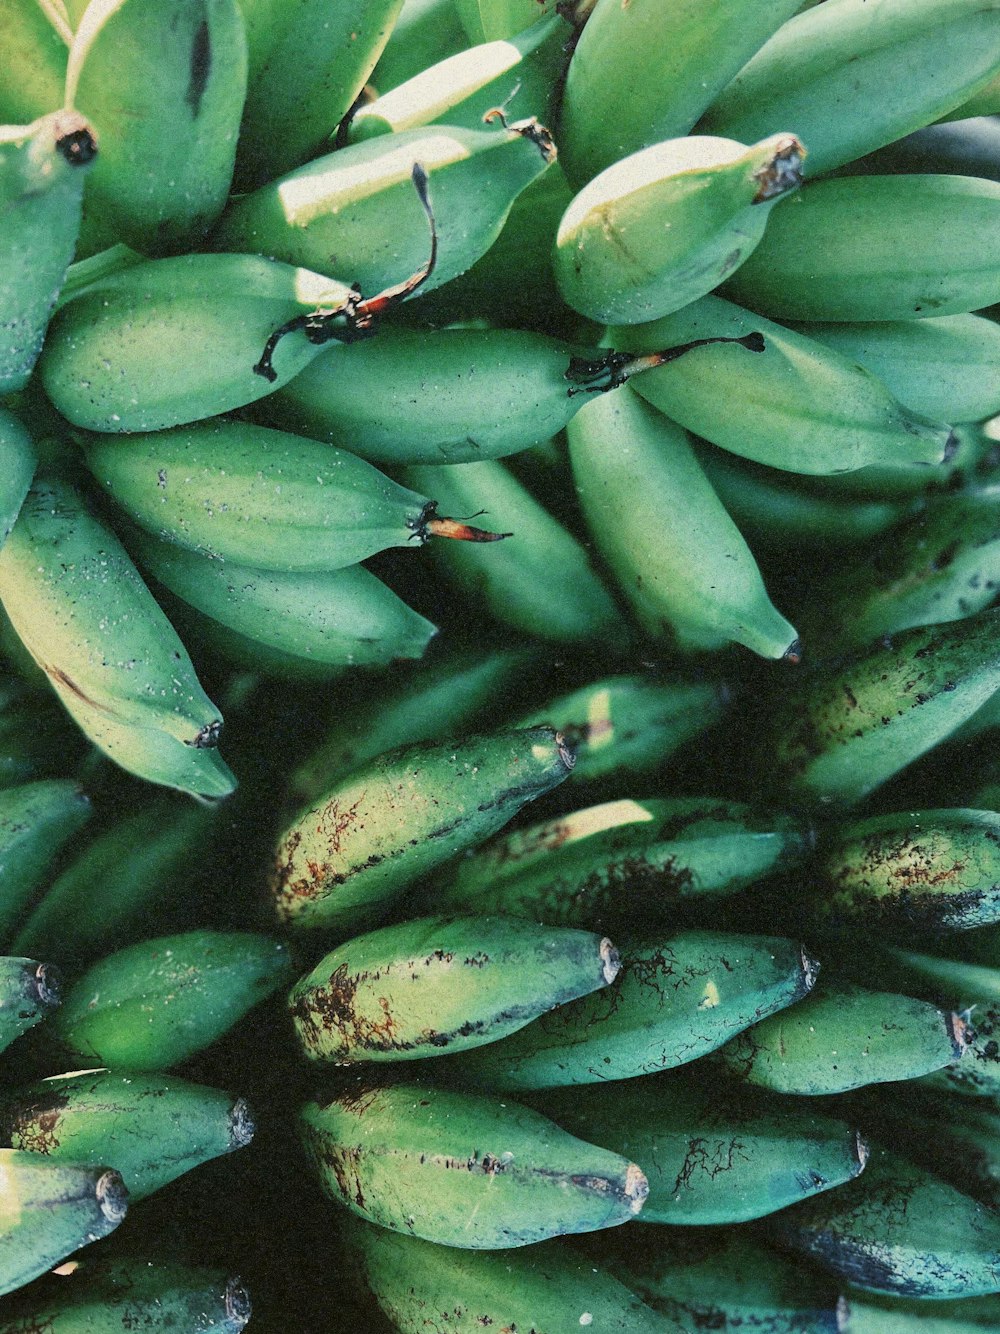 a large bunch of green bananas with brown spots on them